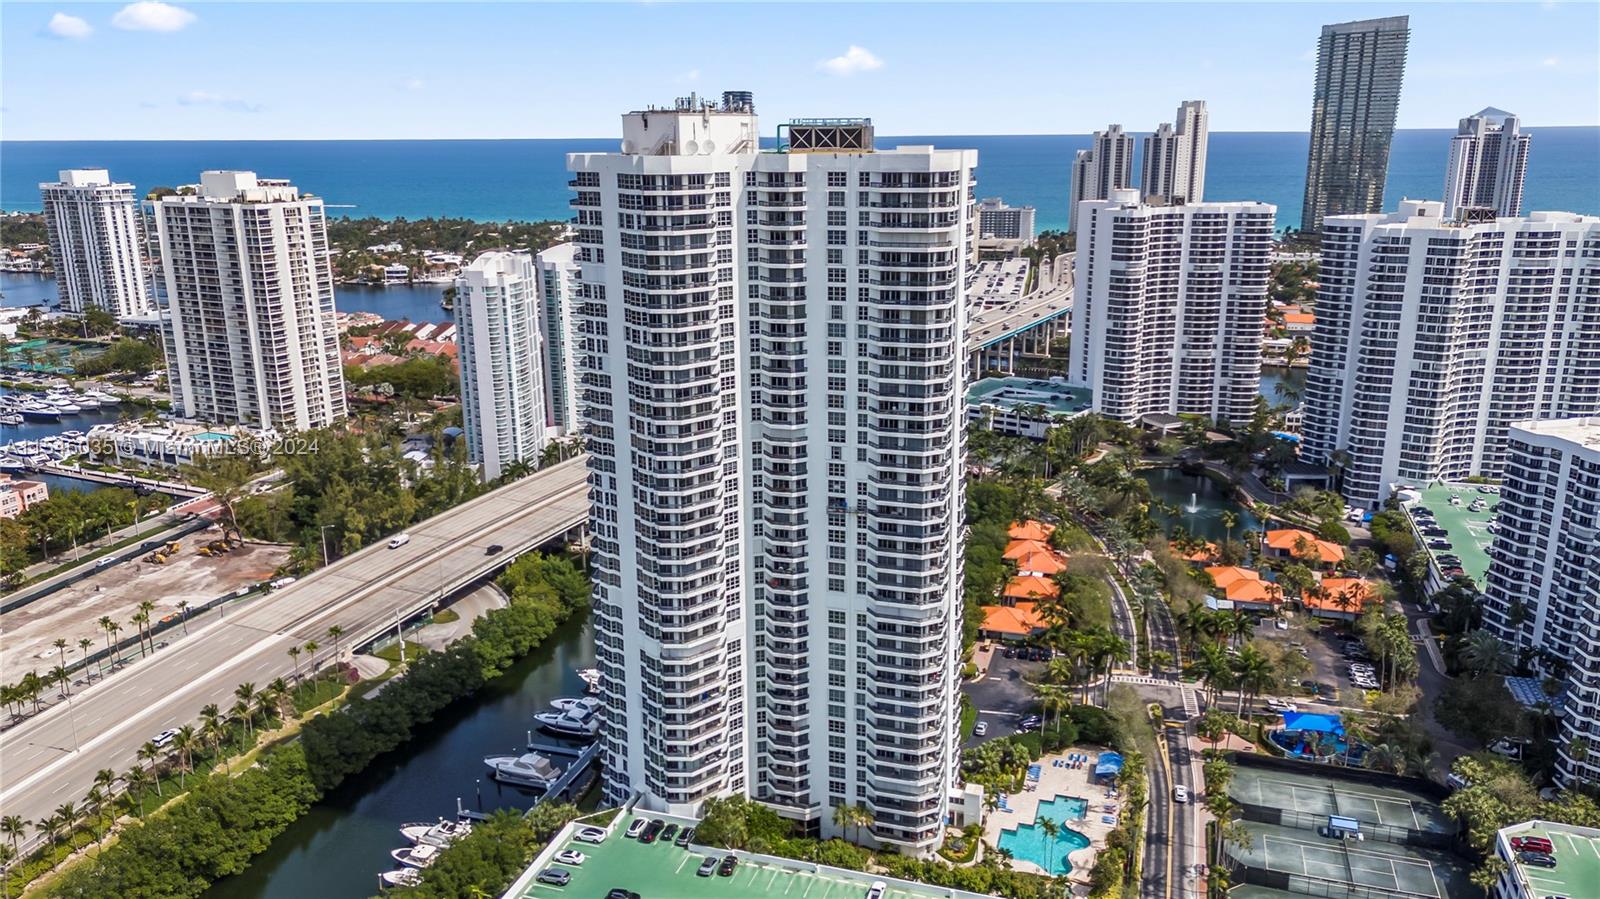 Amazing furnished unit with stunning views to the Intracoastal and Ocean. Enjoy this beautiful 3 bedroom, 3 bath condo in the prestigious Mystic Pointe tower 400 a waterfront luxury community located in the heart of Aventura. Full building amenities including: Spa, fitness center, heated pool, Jacuzzi, Gym, game room, Tennis Courts, Game and recreation room, library, mini market... Walking distance to House of worship, Aventura Mall, restaurants and short distance to the beach. Full size washer and dryer.